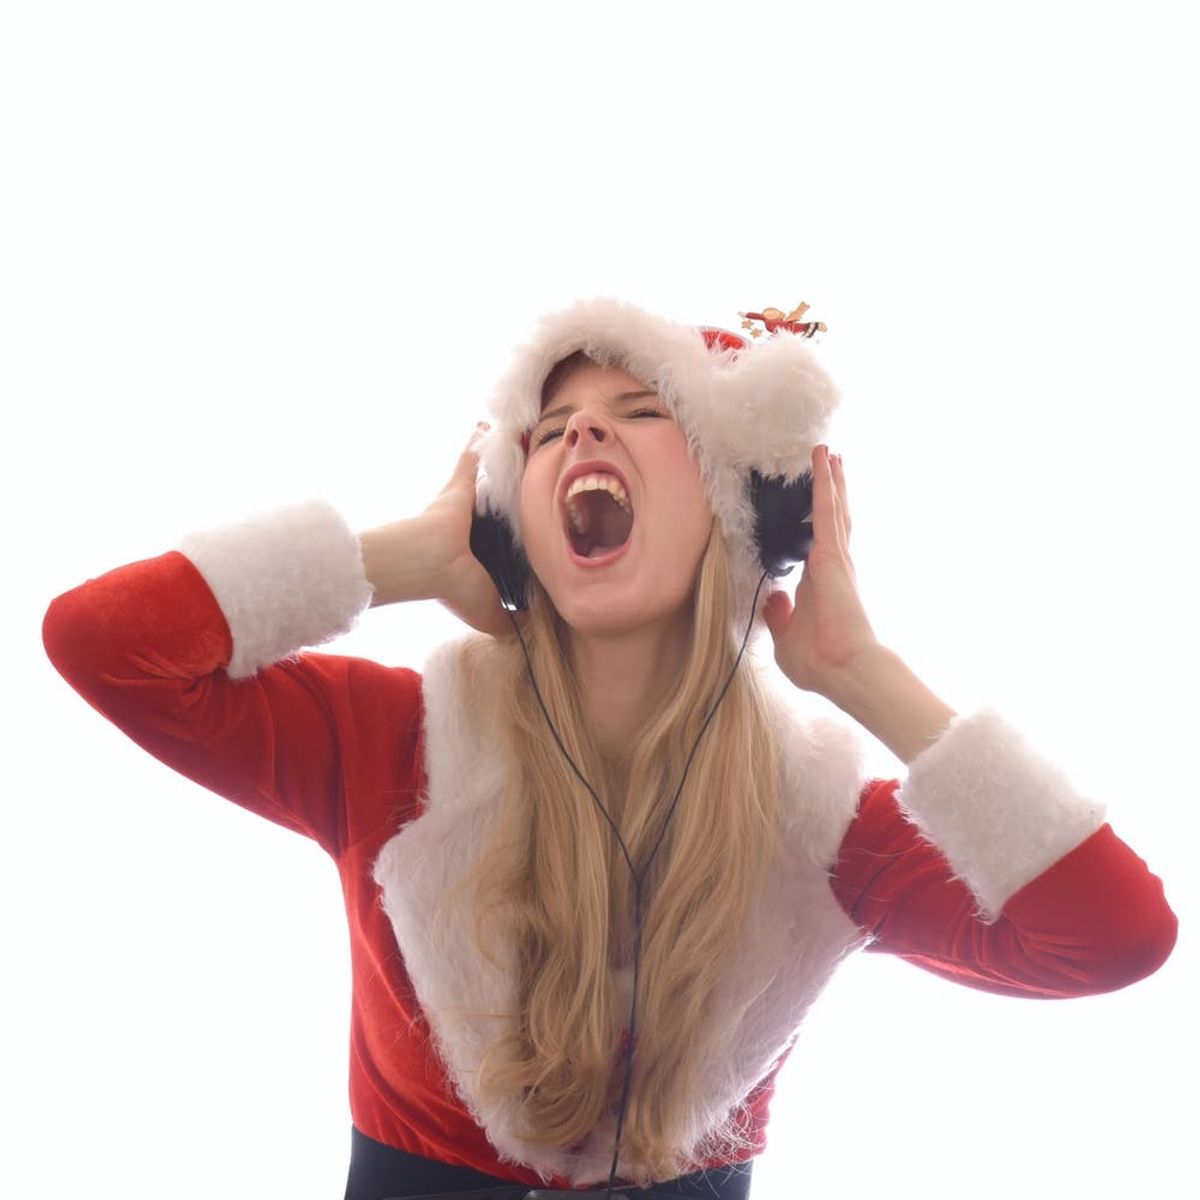 This Psychologist Says Too Much Christmas Music Is Bad for Your Mental Health